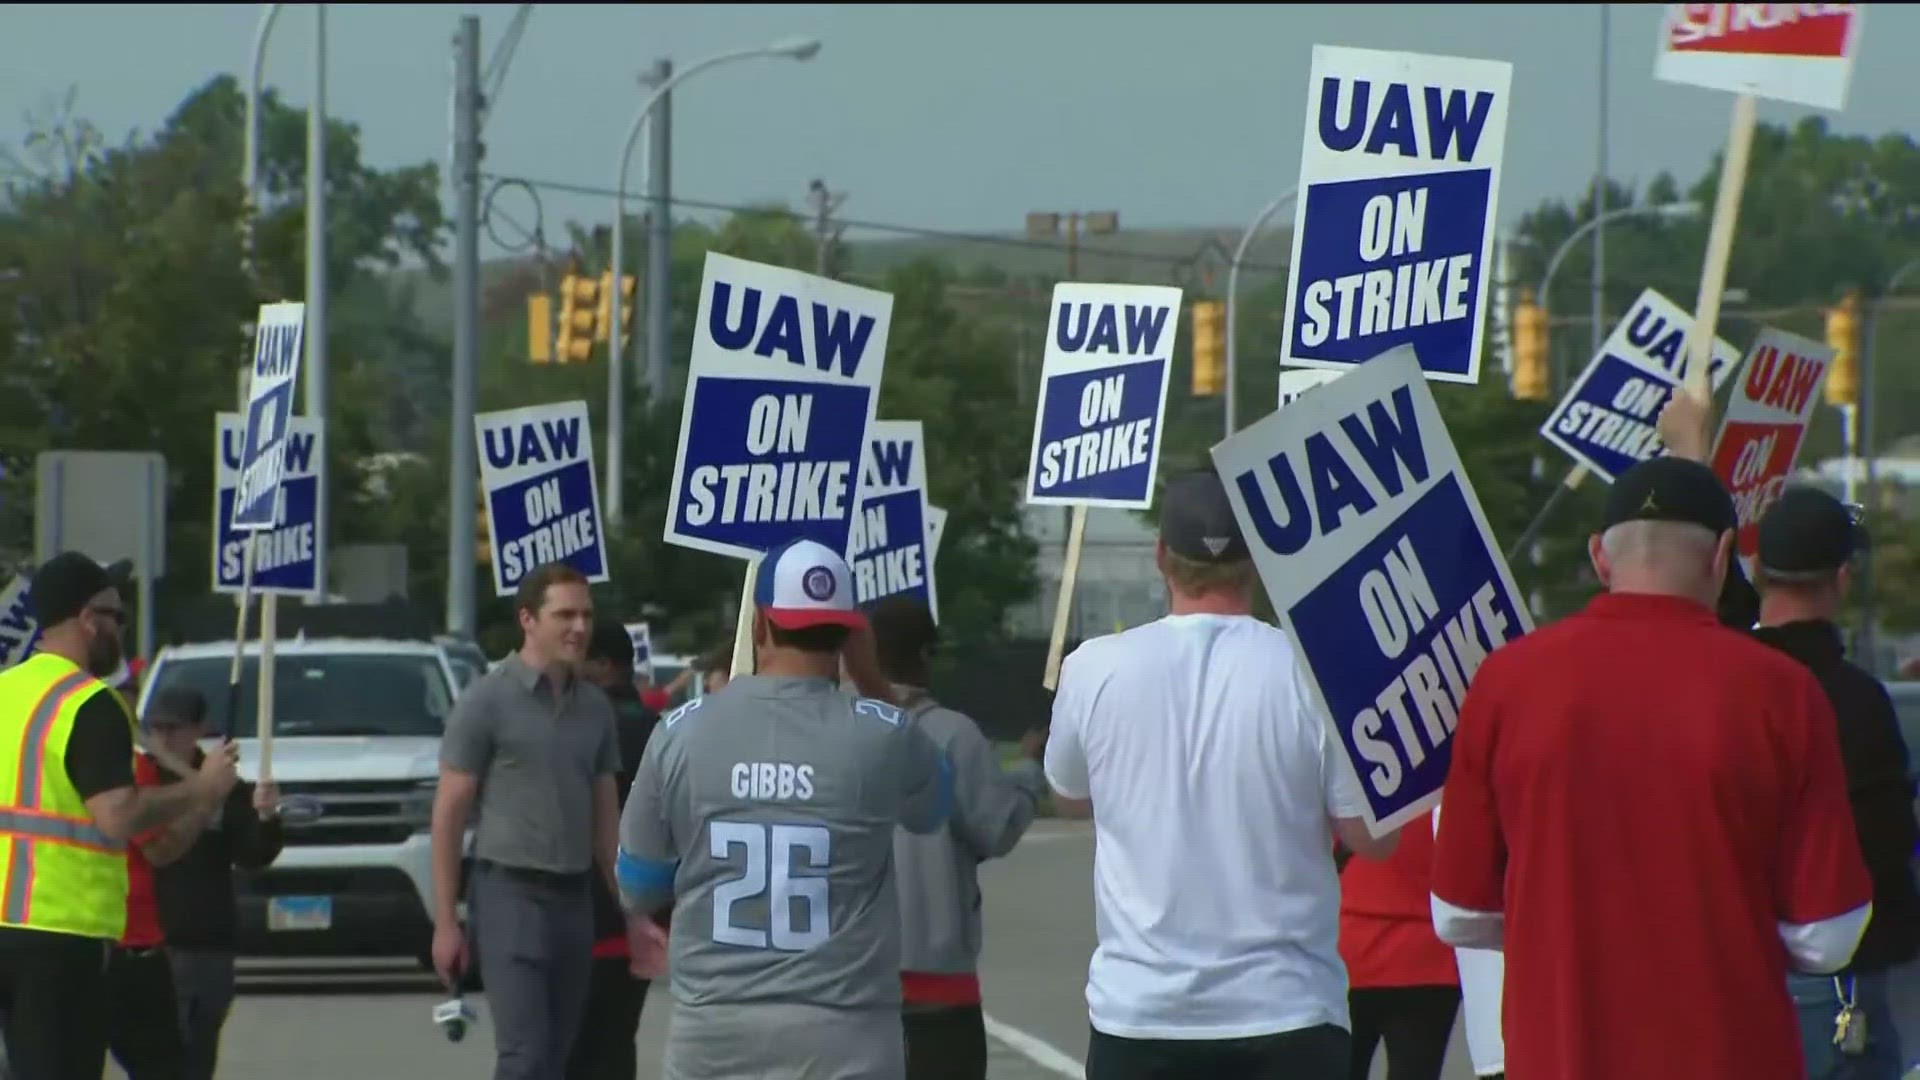 The strike is soon expected to be expanded taking more employees off the job.